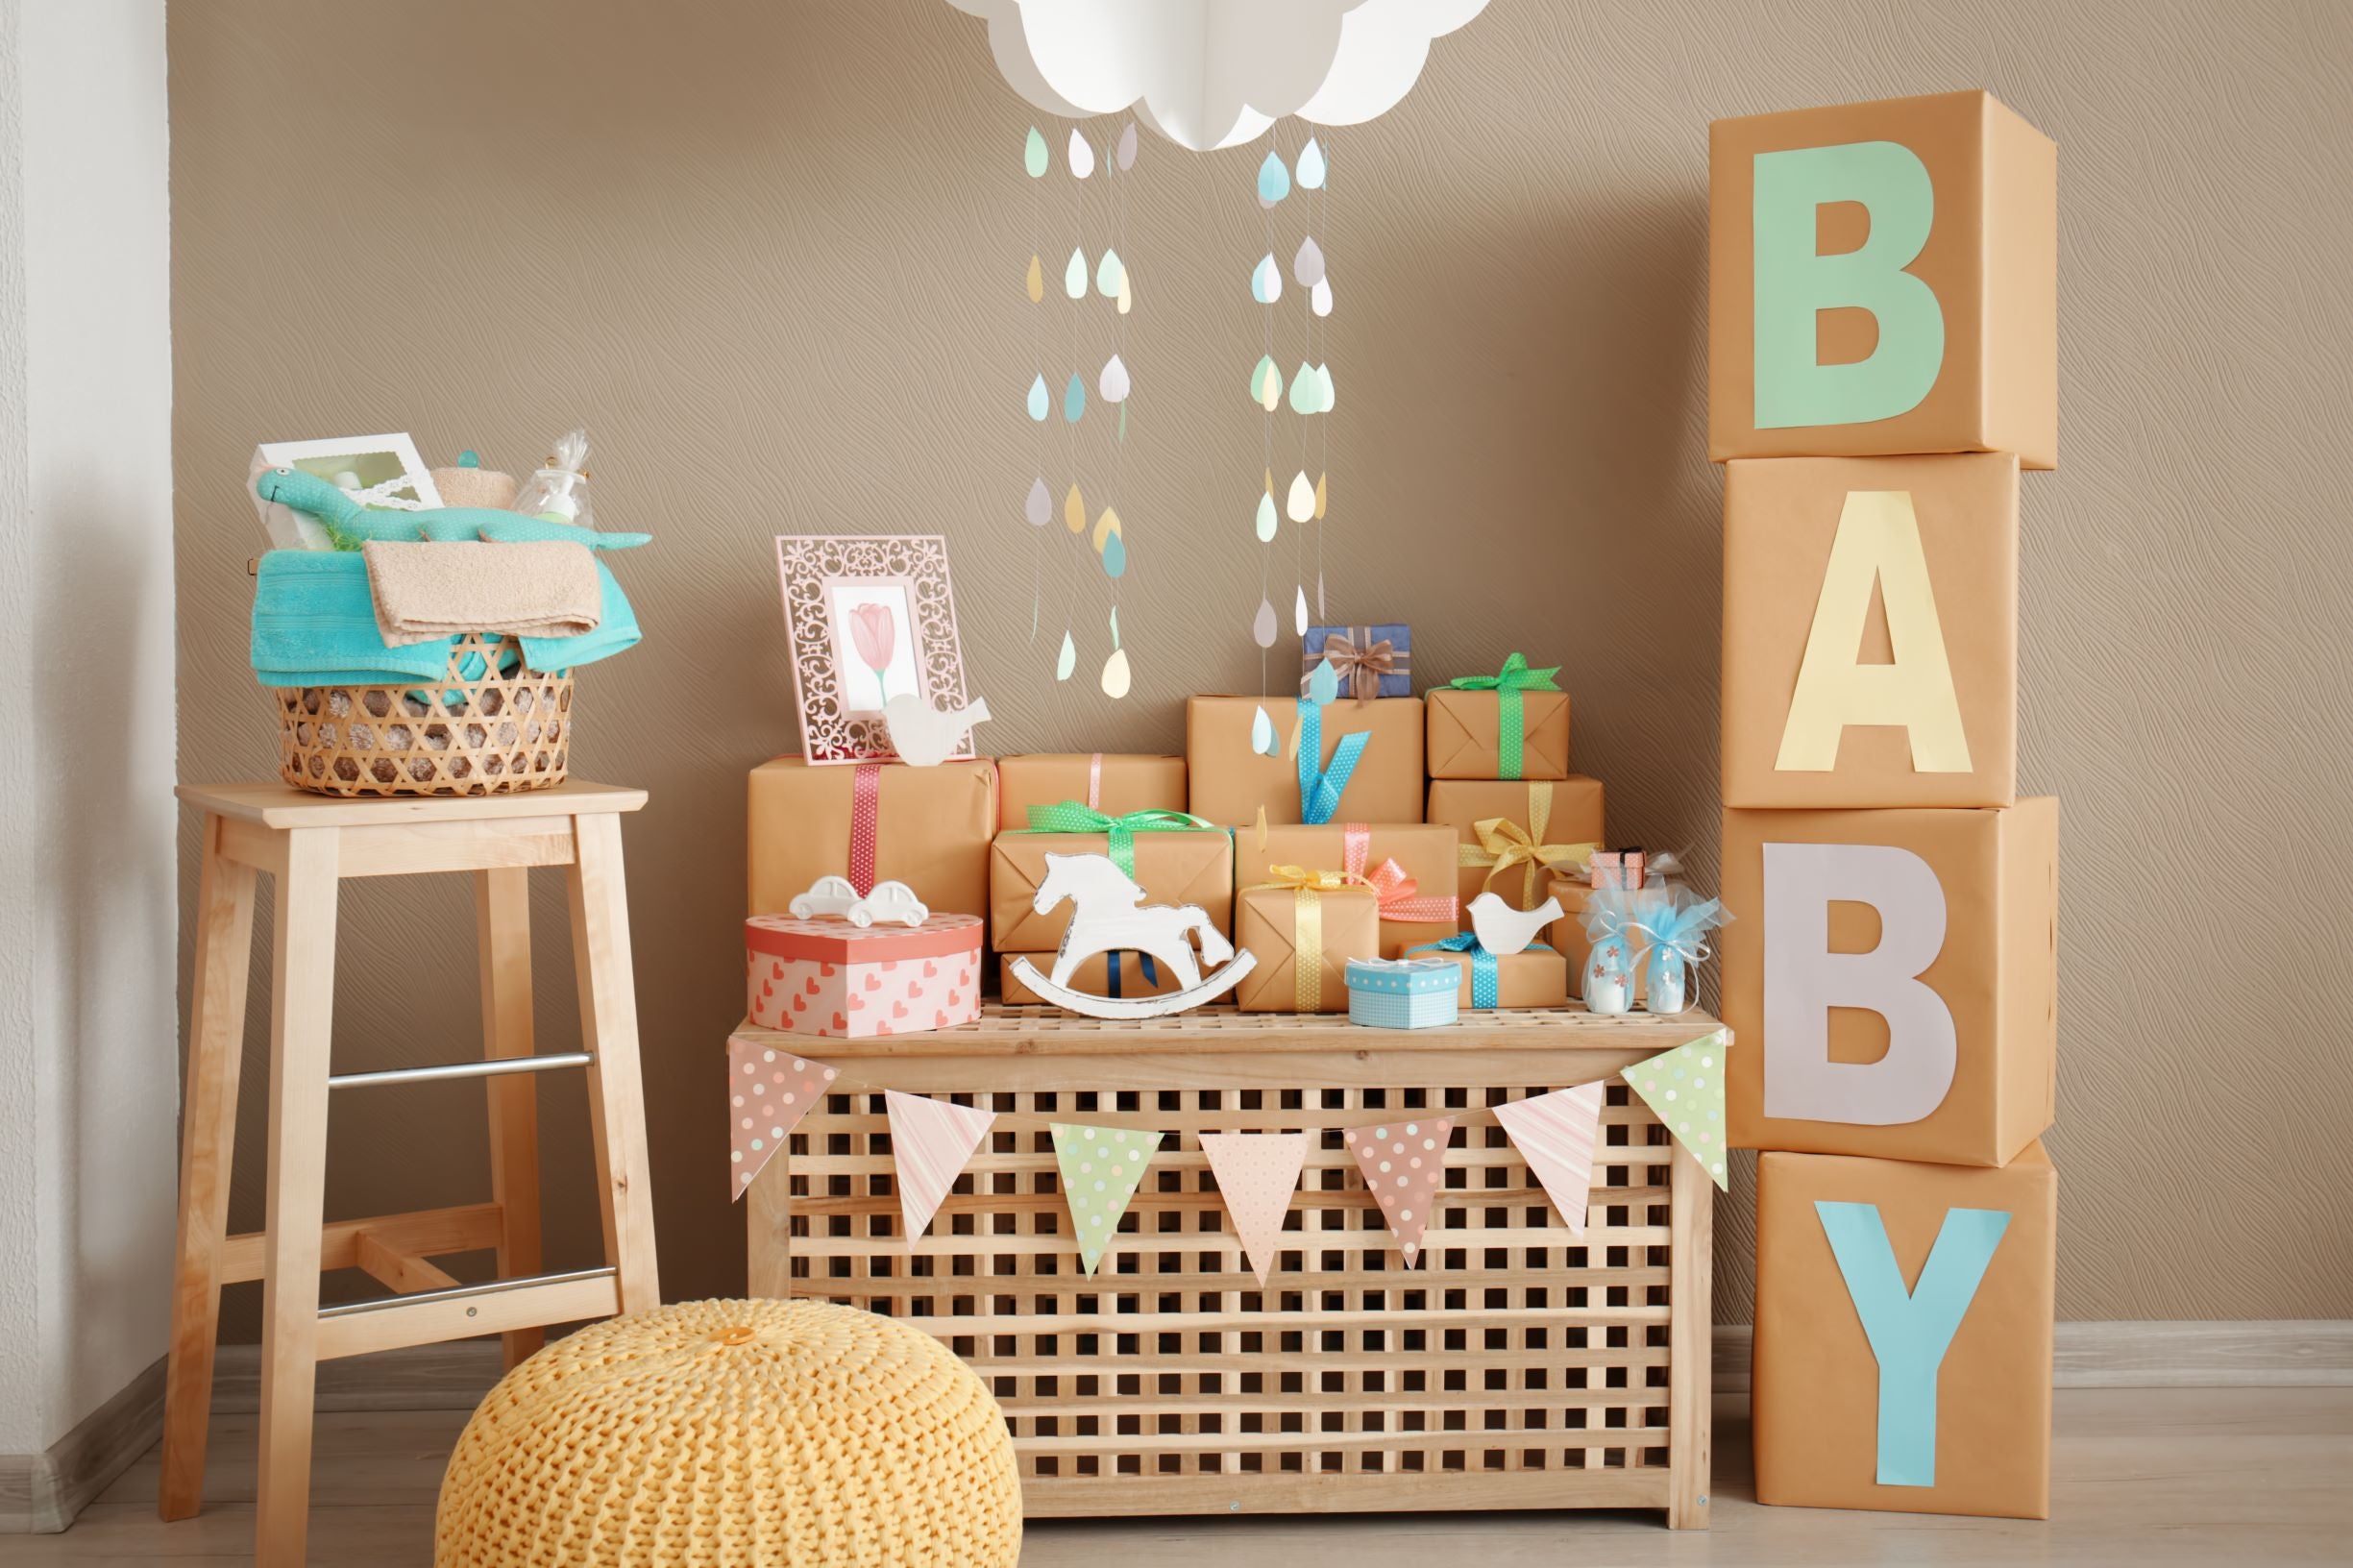 Baby gift wrap ideas: Showered with love - Think.Make.Share.